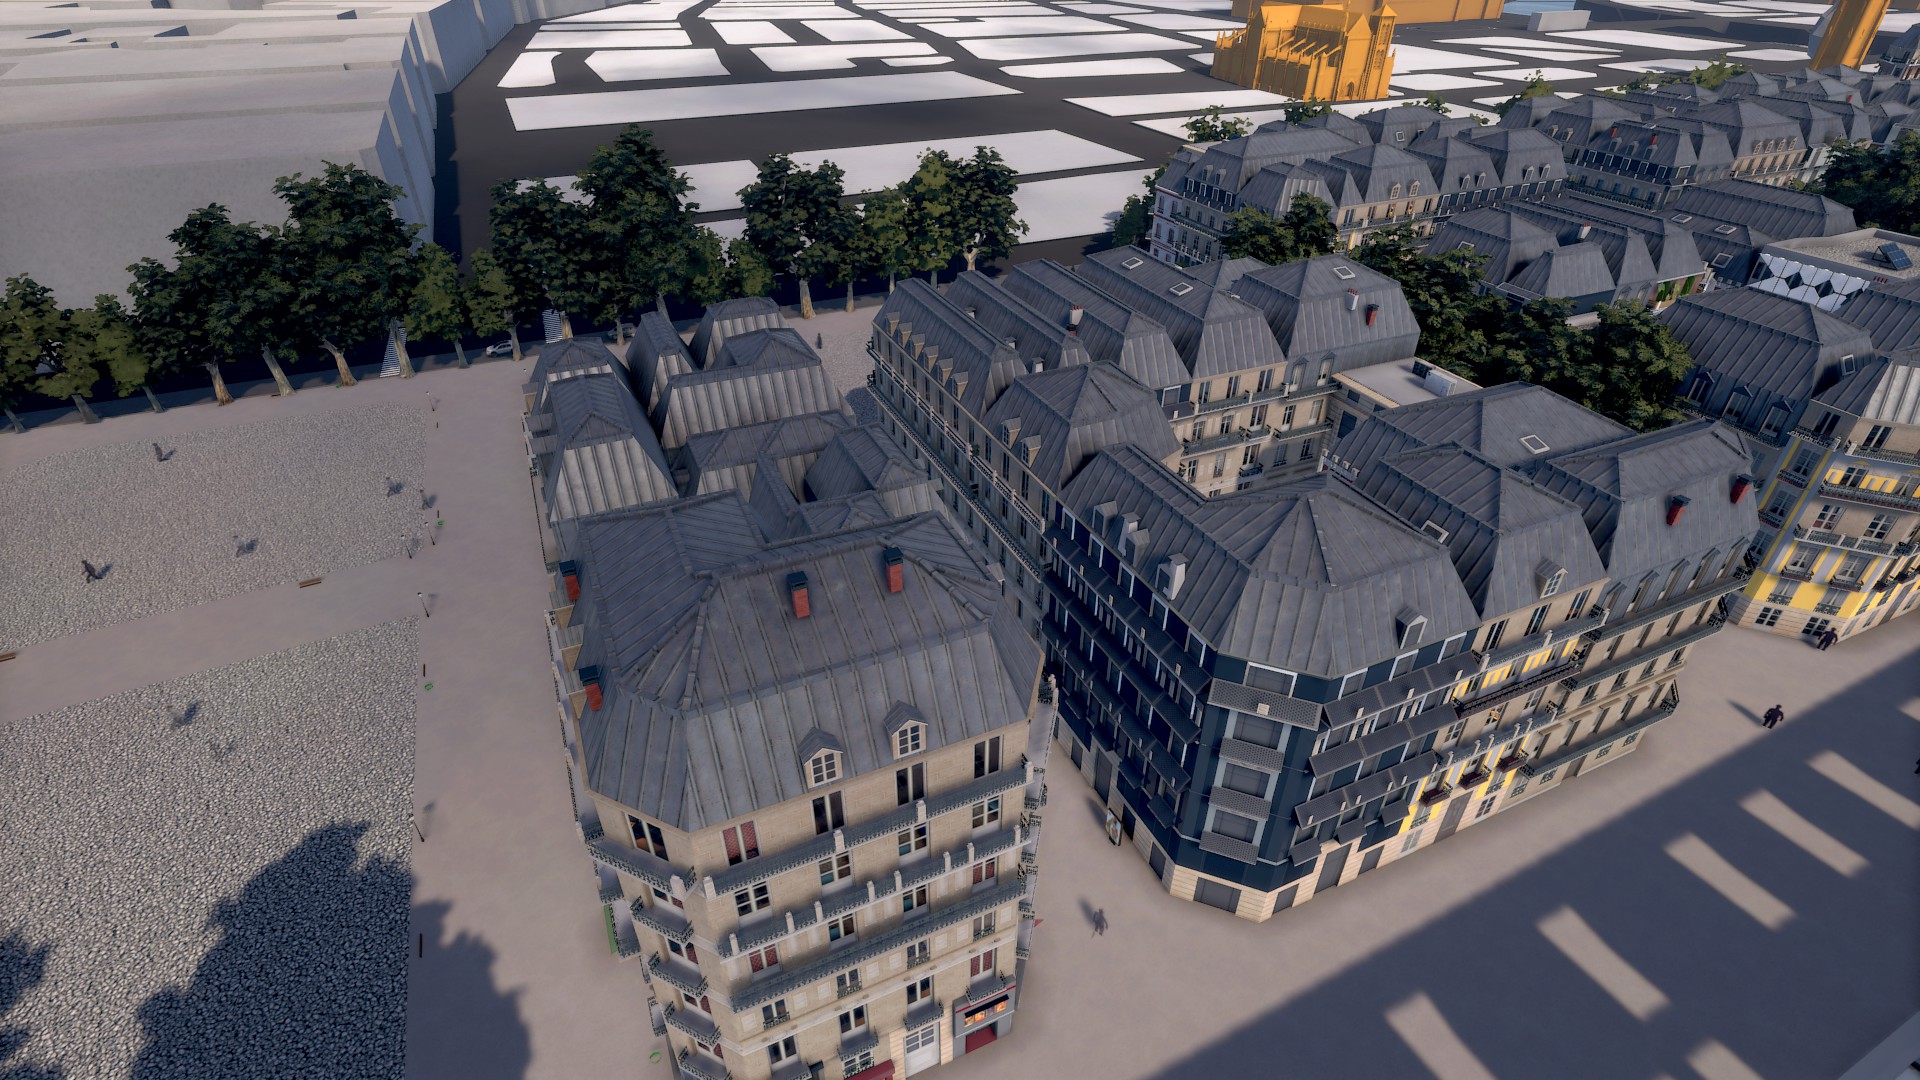 The Architect: Paris - How to make your city look realistic?